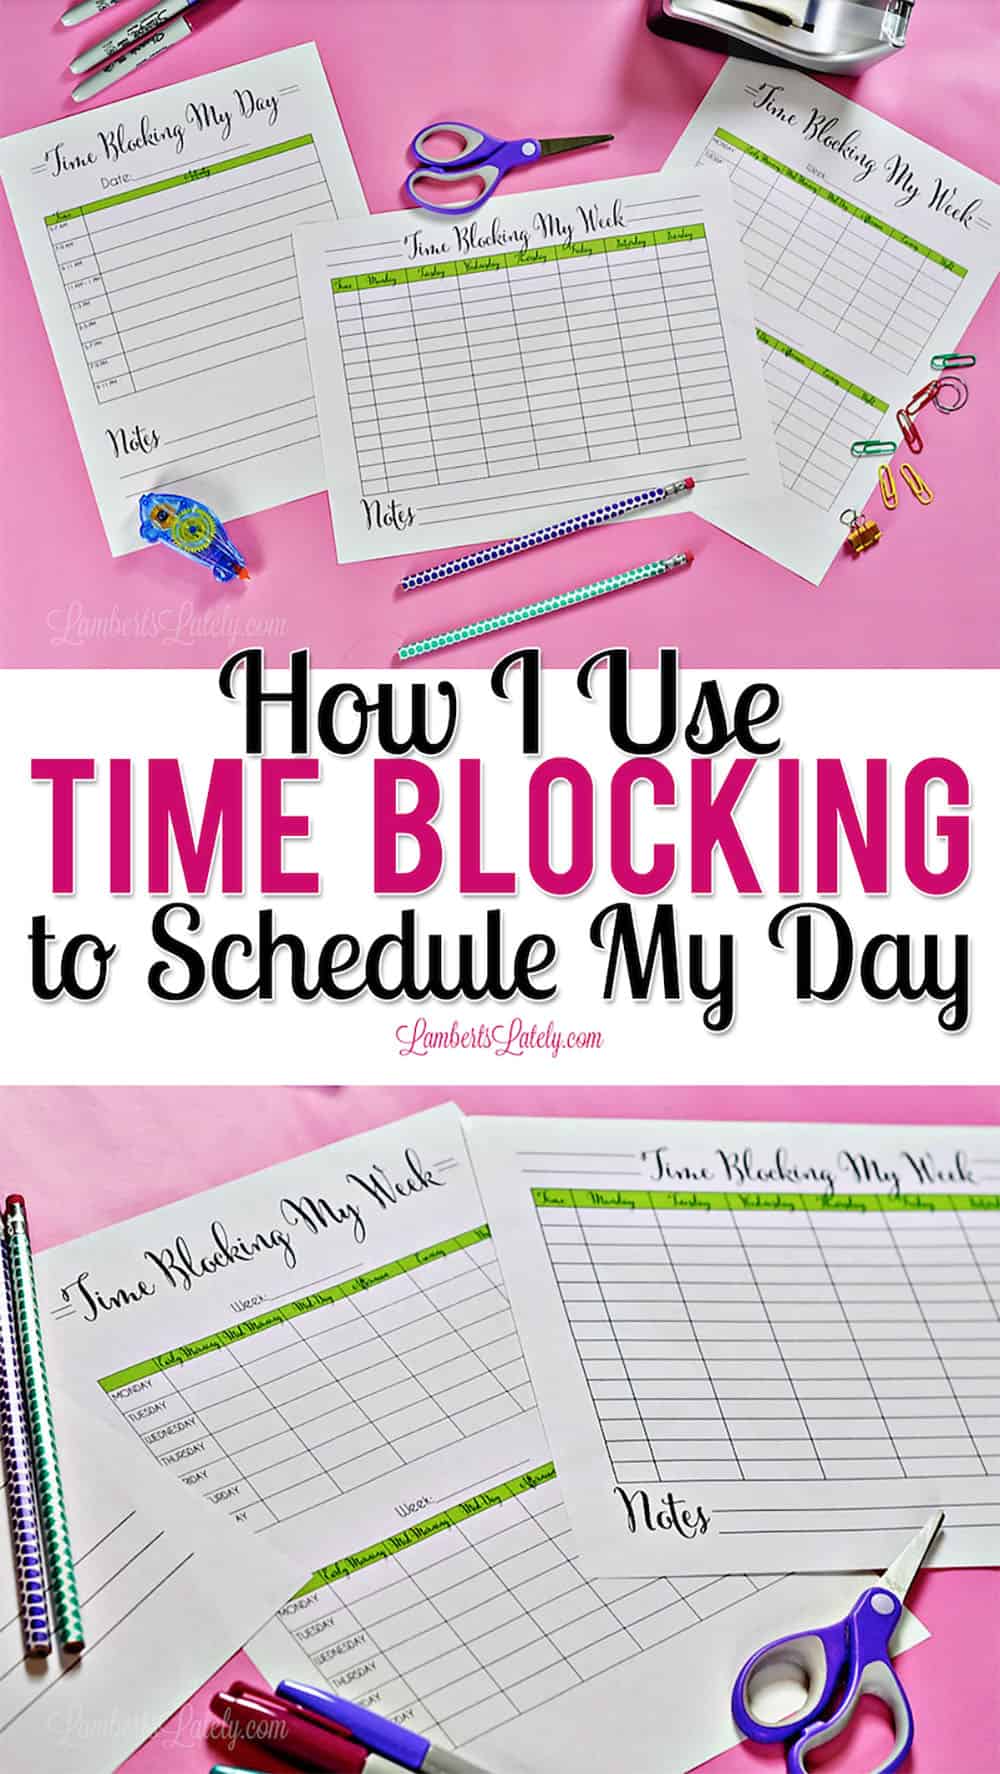 See how you can use time blocking to schedule an effective and productive day! This post includes ideas for structuring your calendar (whether your work from home or outside the home), free weekly and daily planner printables, and the best tools to use for organizing time blocks.